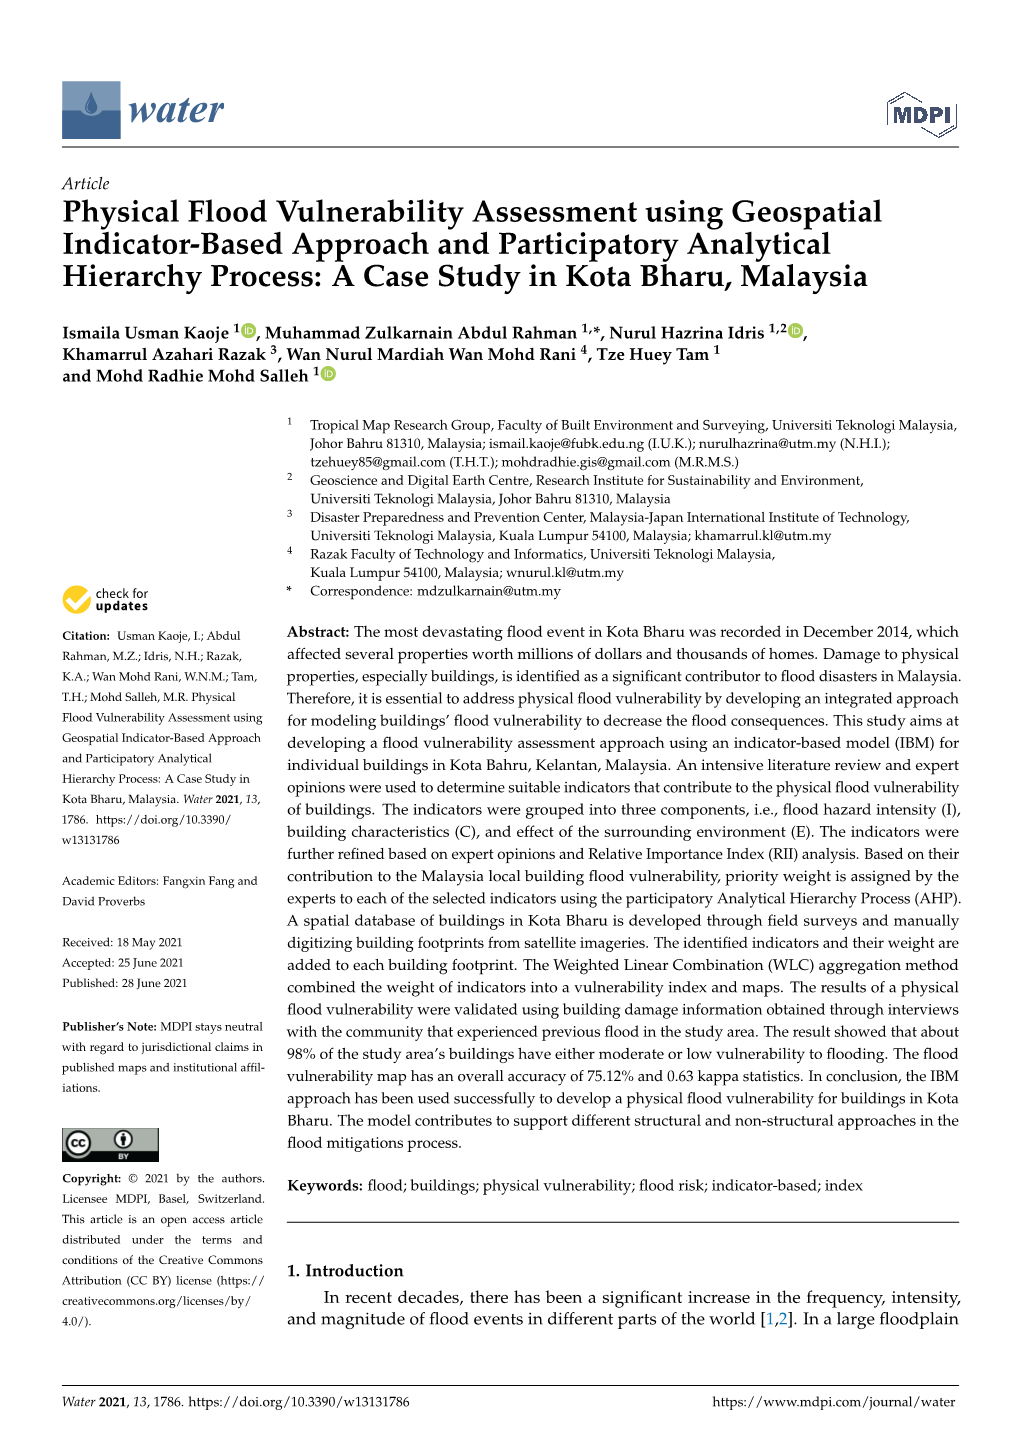 Physical Flood Vulnerability Assessment Using Geospatial Indicator-Based Approach and Participatory Analytical Hierarchy Process: a Case Study in Kota Bharu, Malaysia